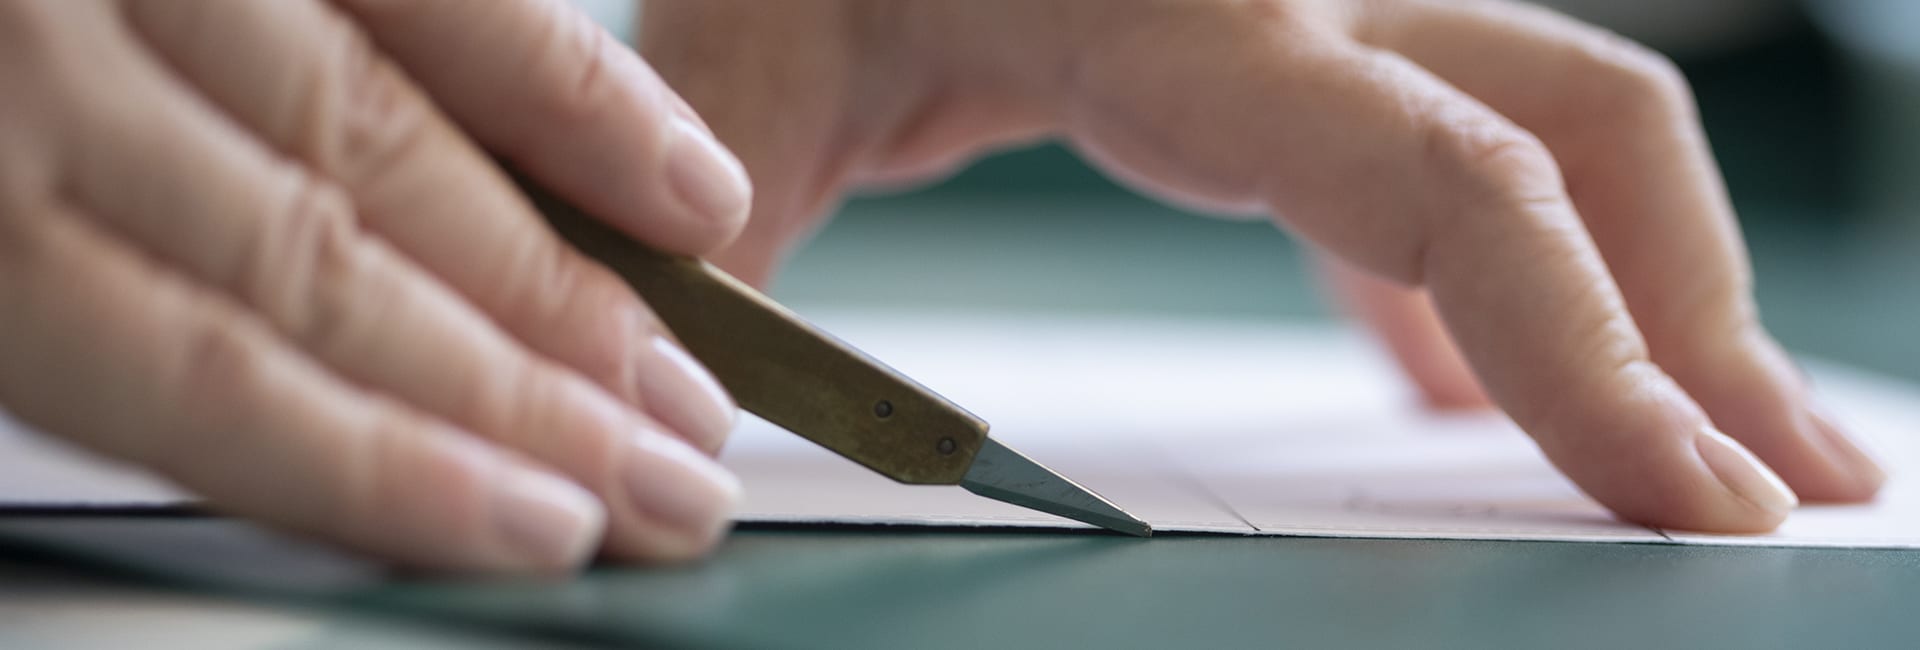 Craftsman cutting a calf leather panel during the making of a Bulgari bag, close-up of the hands.